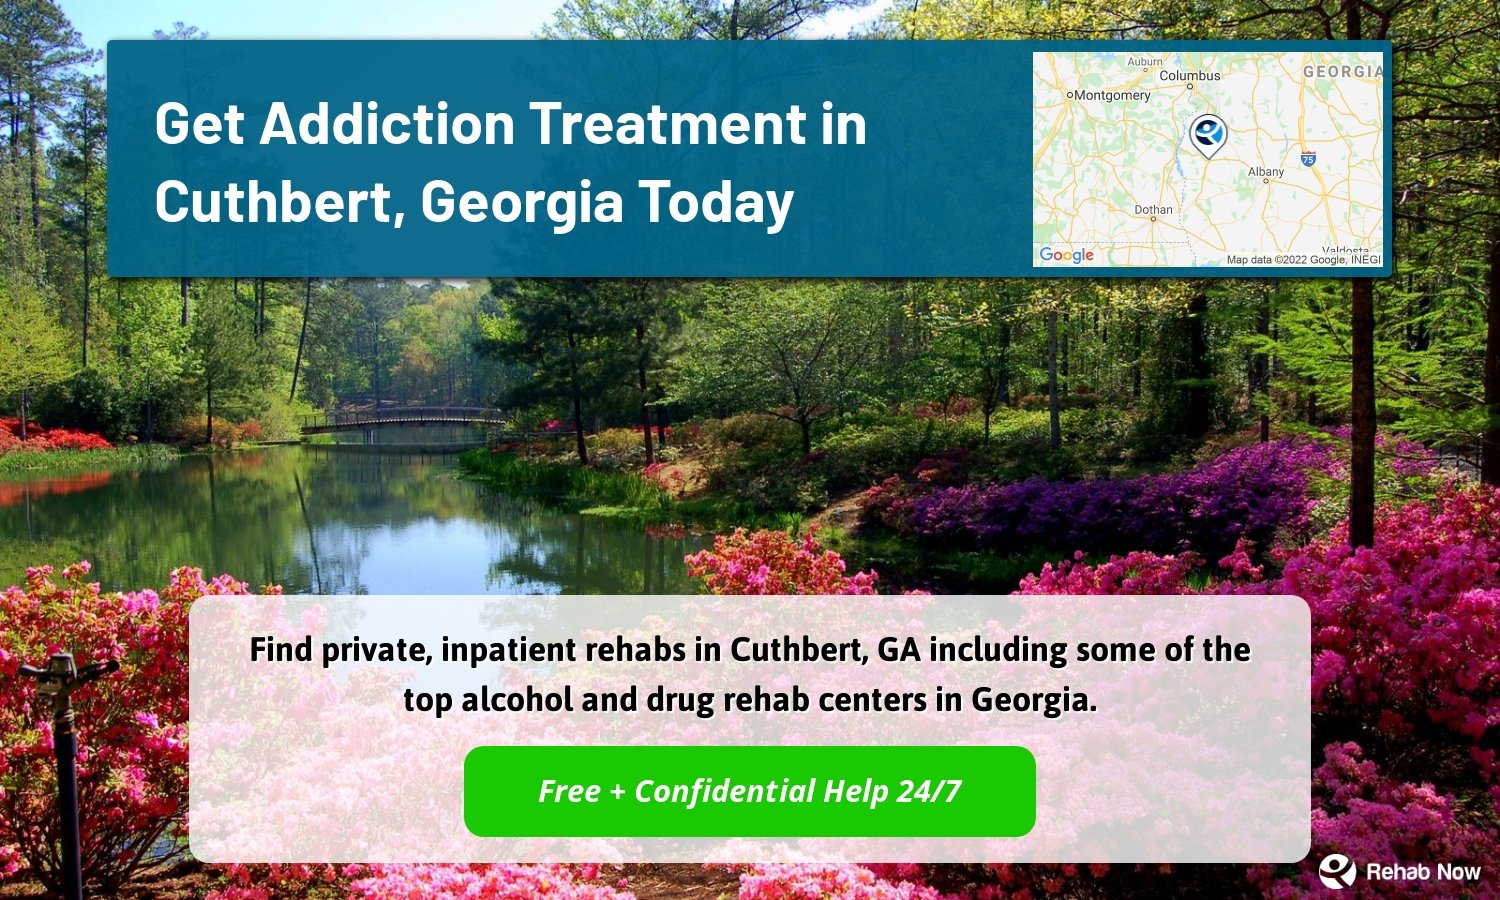 Find private, inpatient rehabs in Cuthbert, GA including some of the top alcohol and drug rehab centers in Georgia.